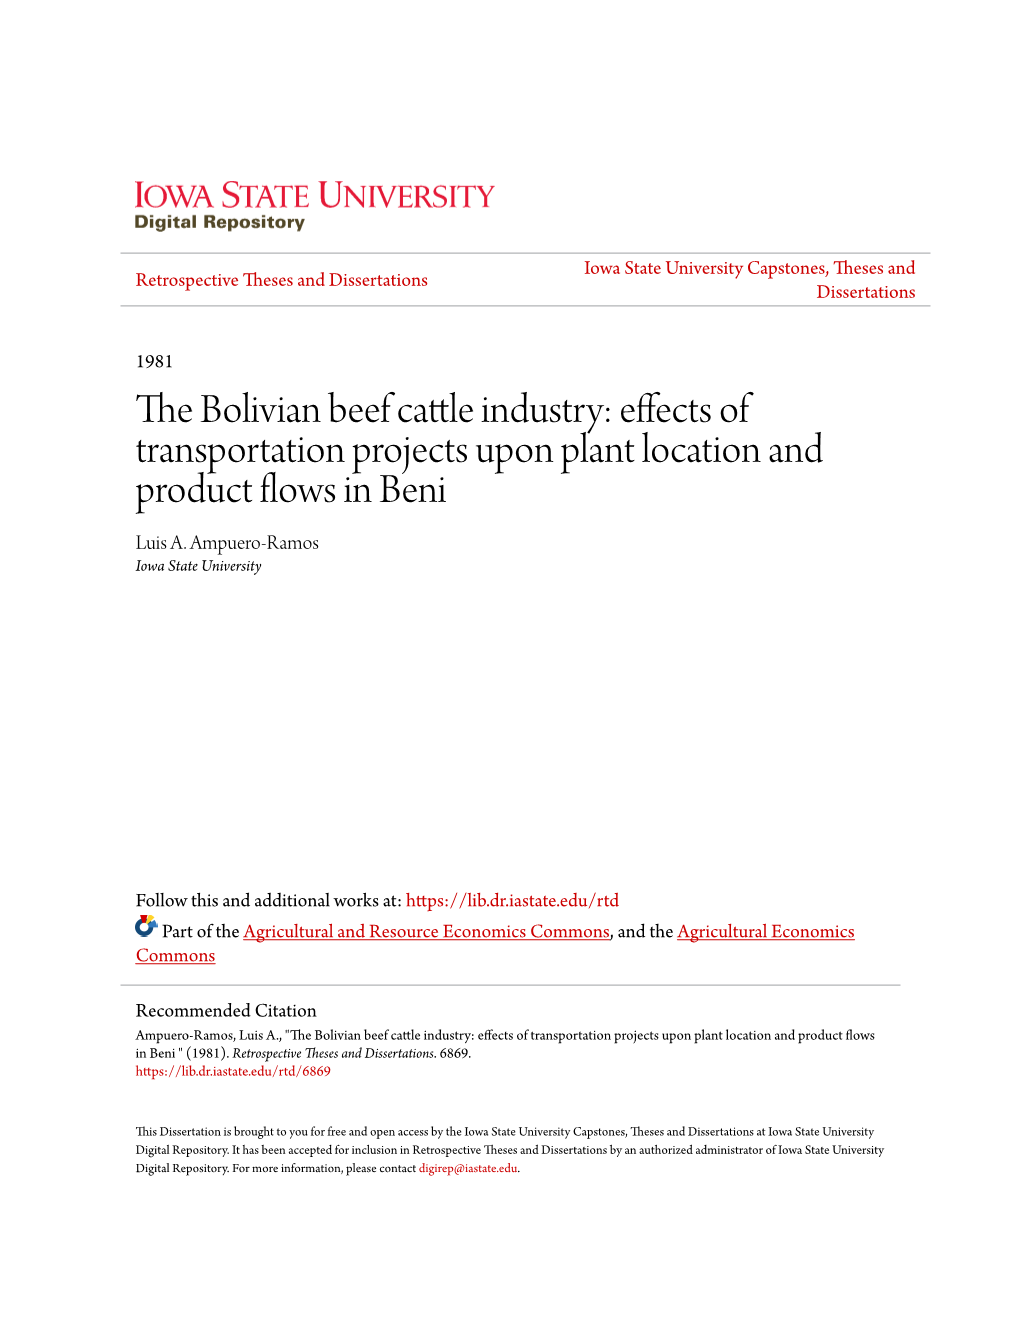 The Bolivian Beef Cattle Industry: Effects of Transportation Projects Upon Plant Location and Product Flows in Beni Luis A